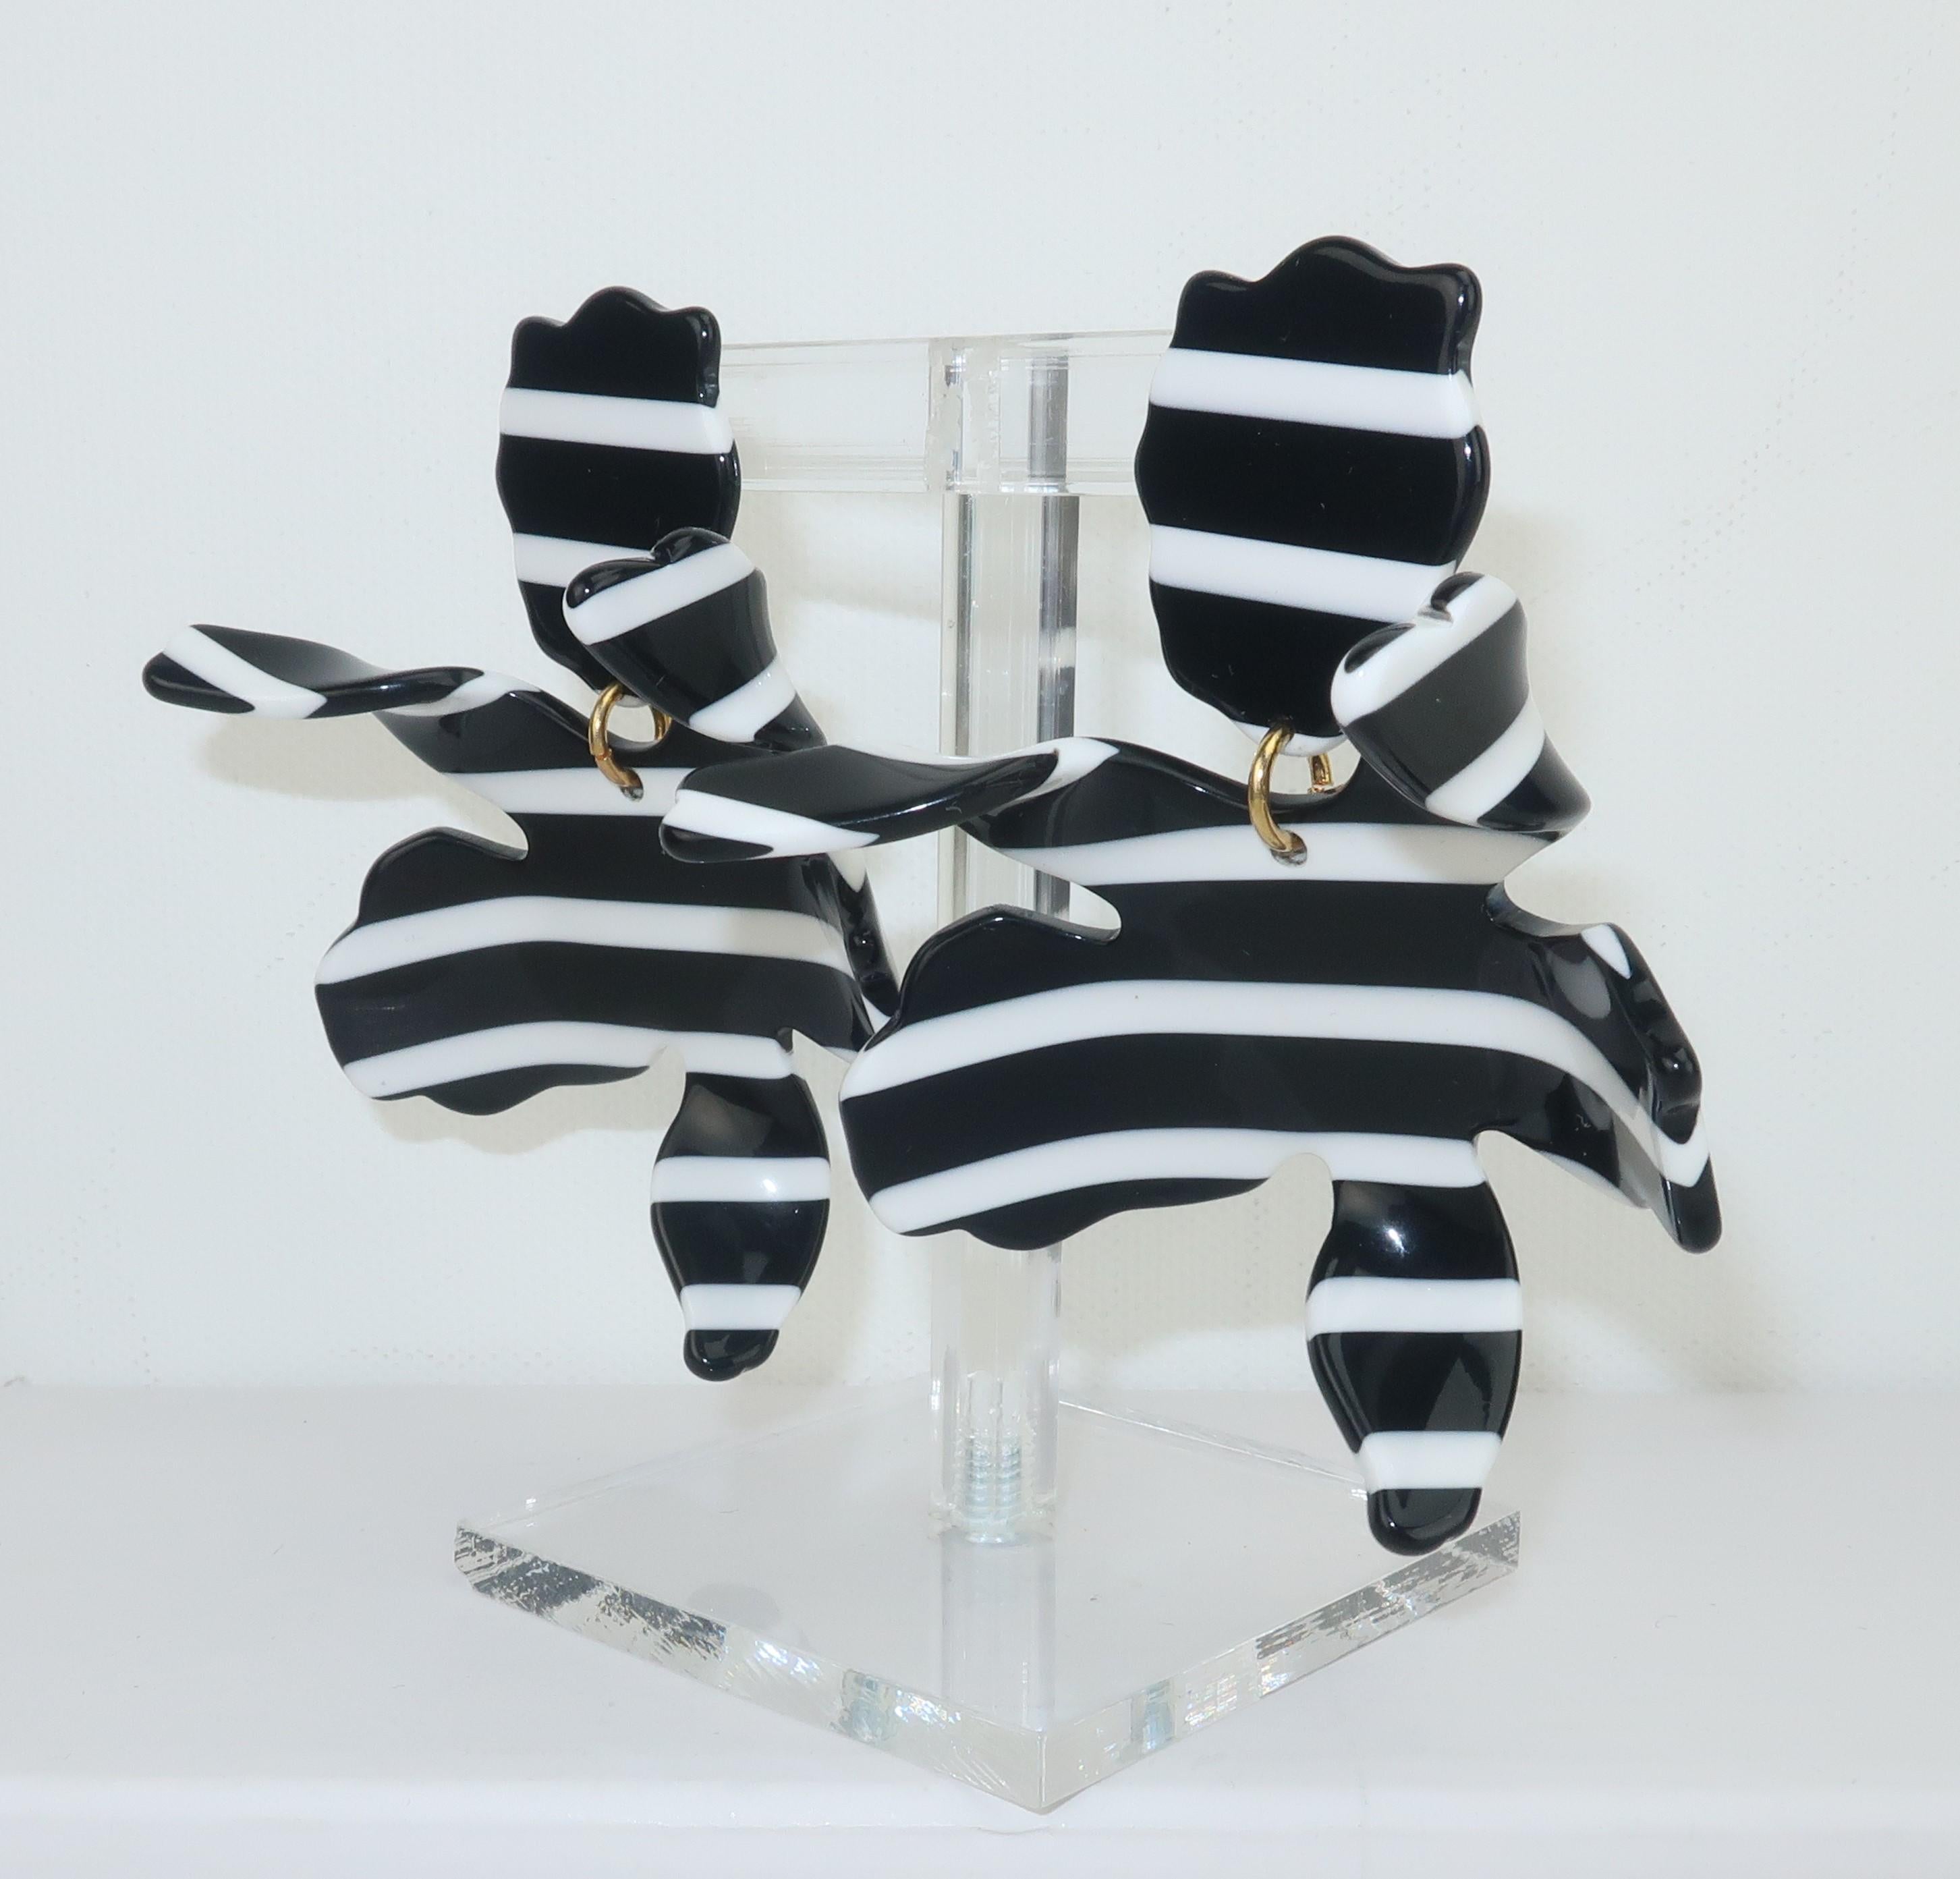 Lele Sadoughi black and white striped 'Lily' earrings with pierced post hardware.  Lele describes her designs as 'apologetically maximal' and these fun graphic resin earrings fit the description.  Signed at the back of each earring.
CONDITION
Very